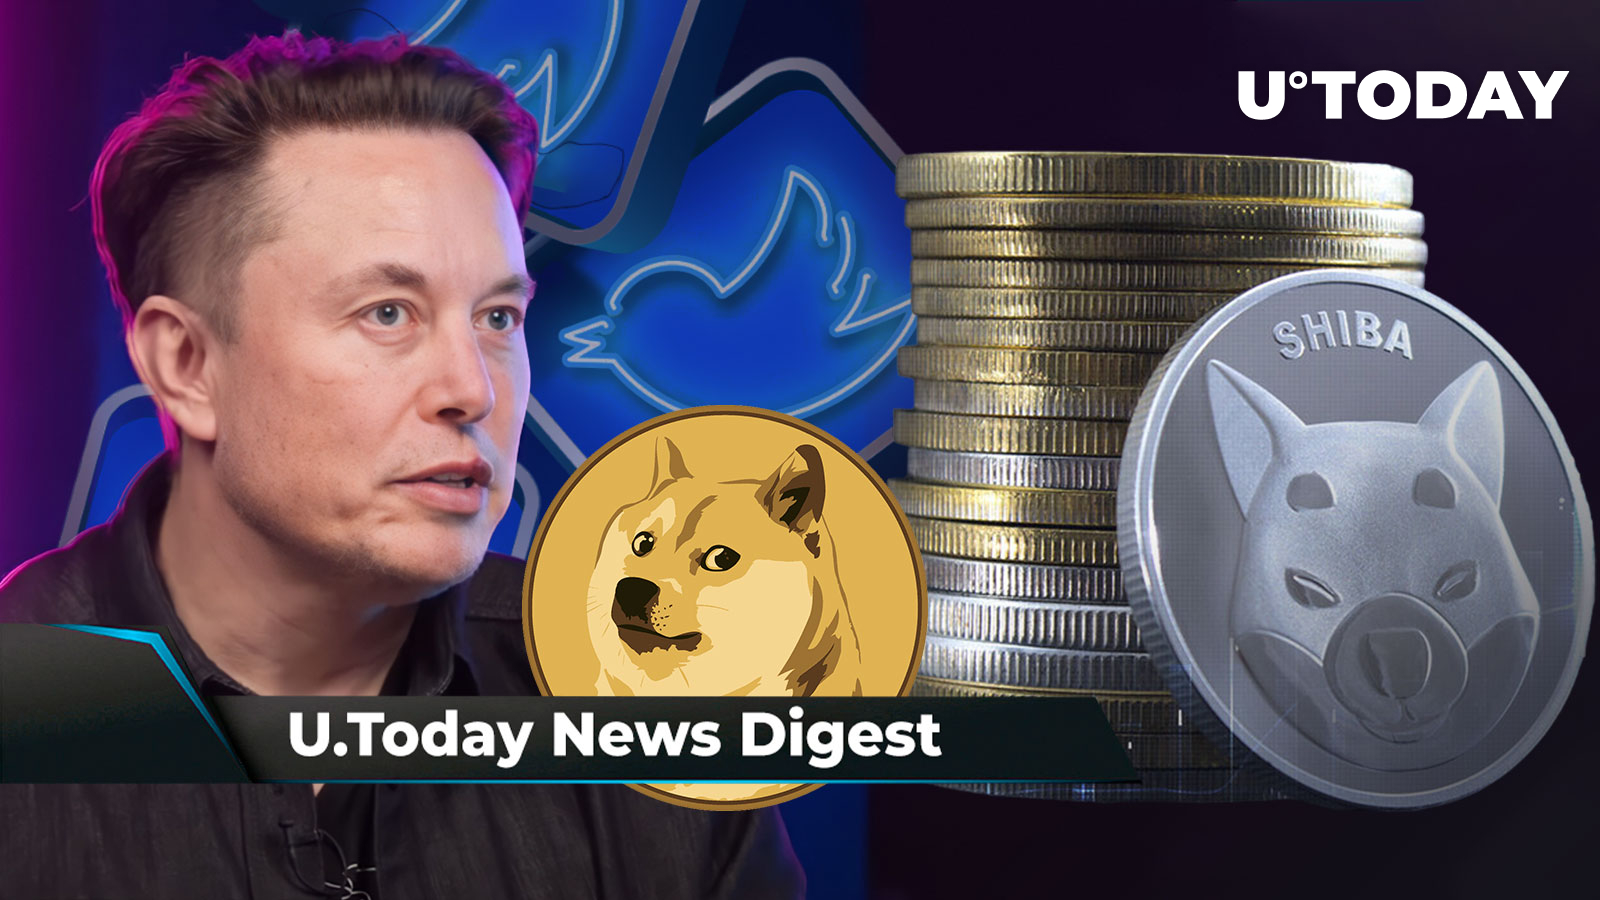 SHIB Trifecta Accepted via Prepaid Visa Cards, Michael Burry Shocks Community with One-Word Tweet, Elon Musk’s Twitter ‘Slaps’ DOGE Army: Crypto News Digest by U.Today